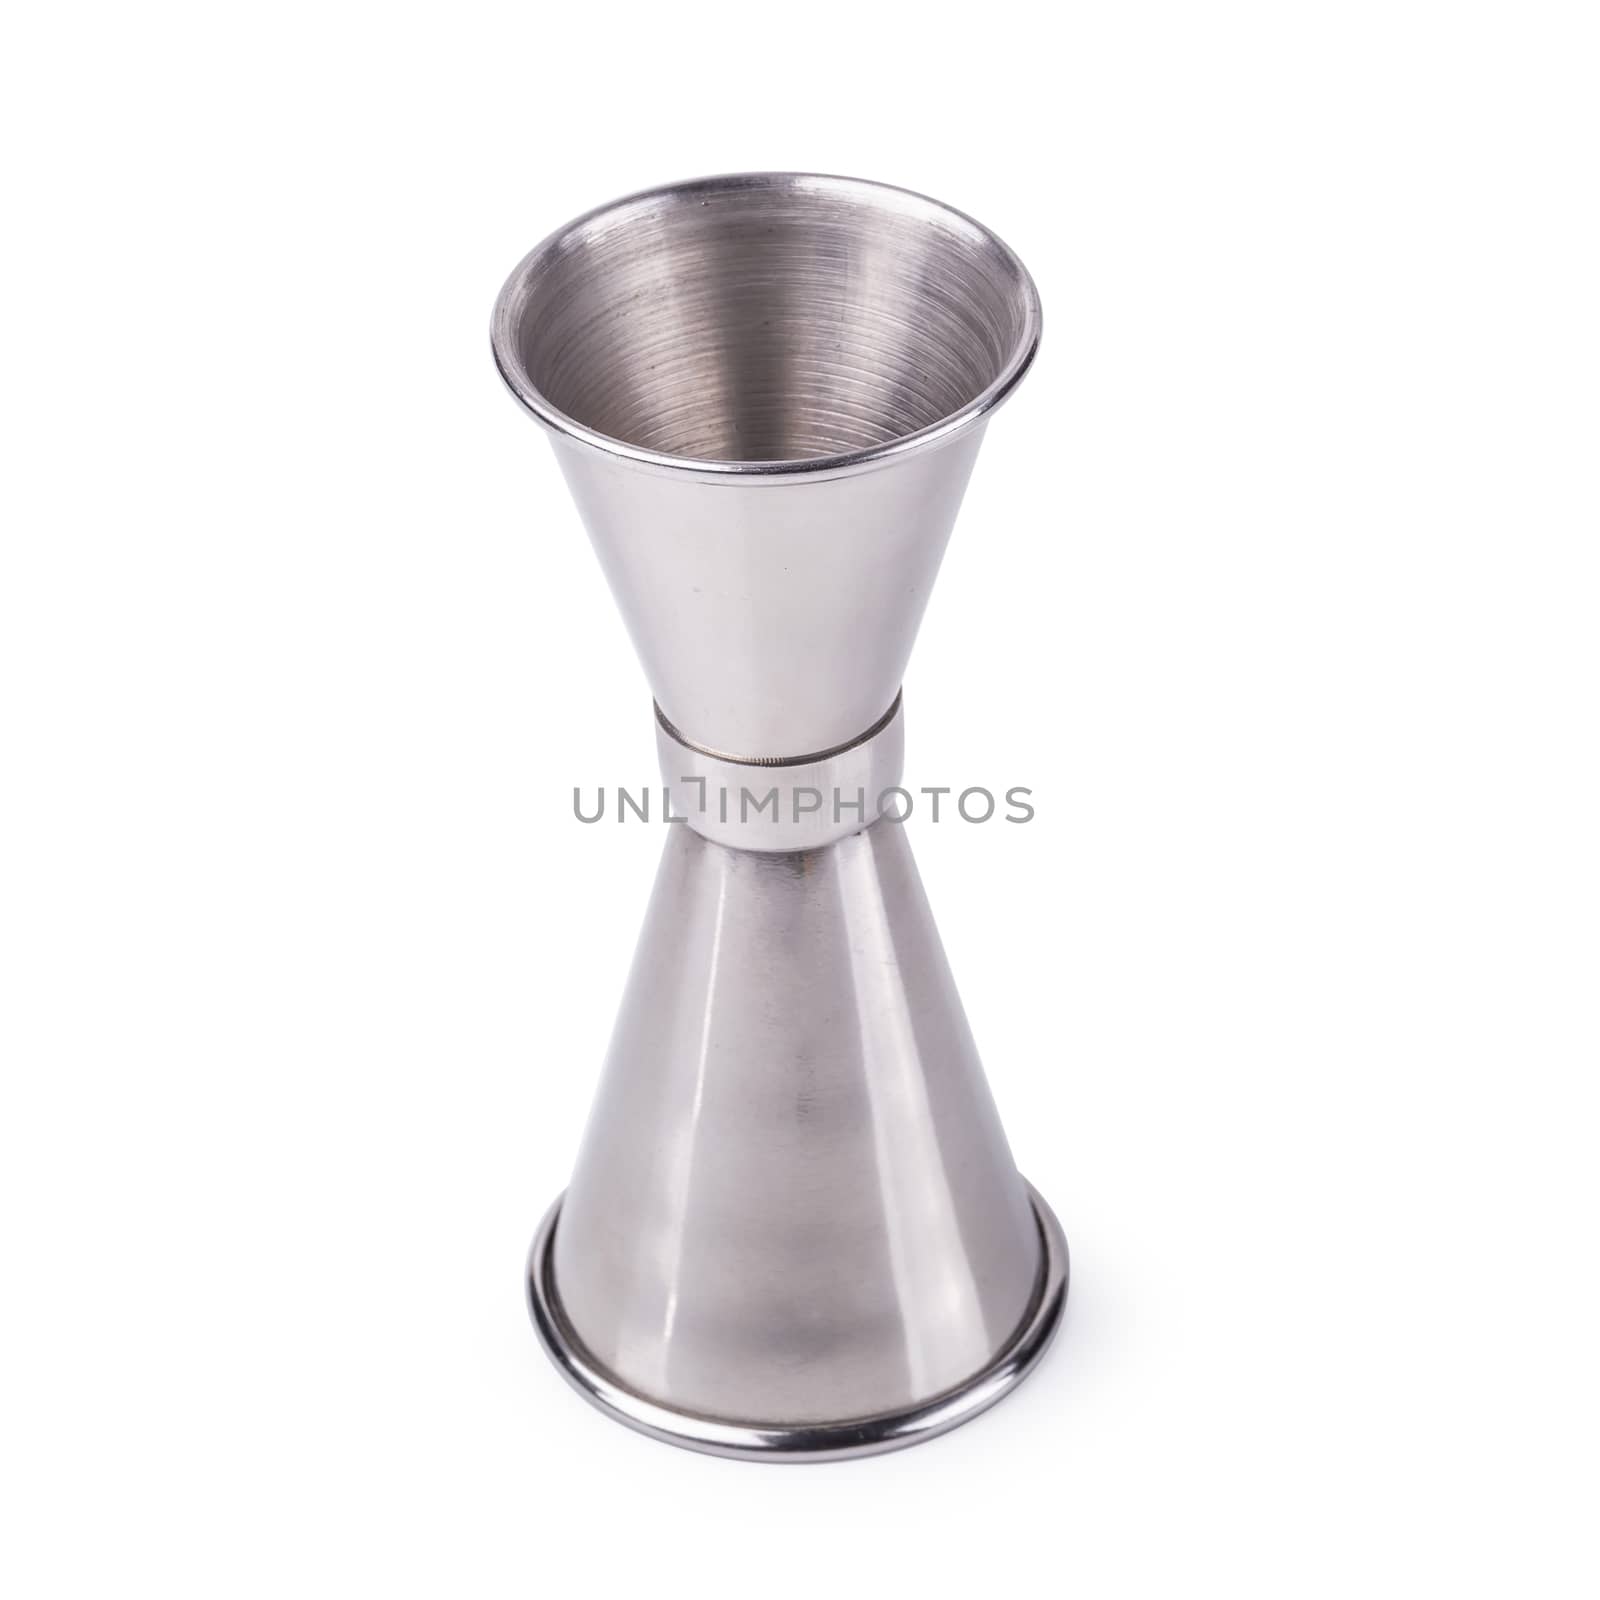 Stainless steel measurement cup for beverage and cooking isolated on a white background.